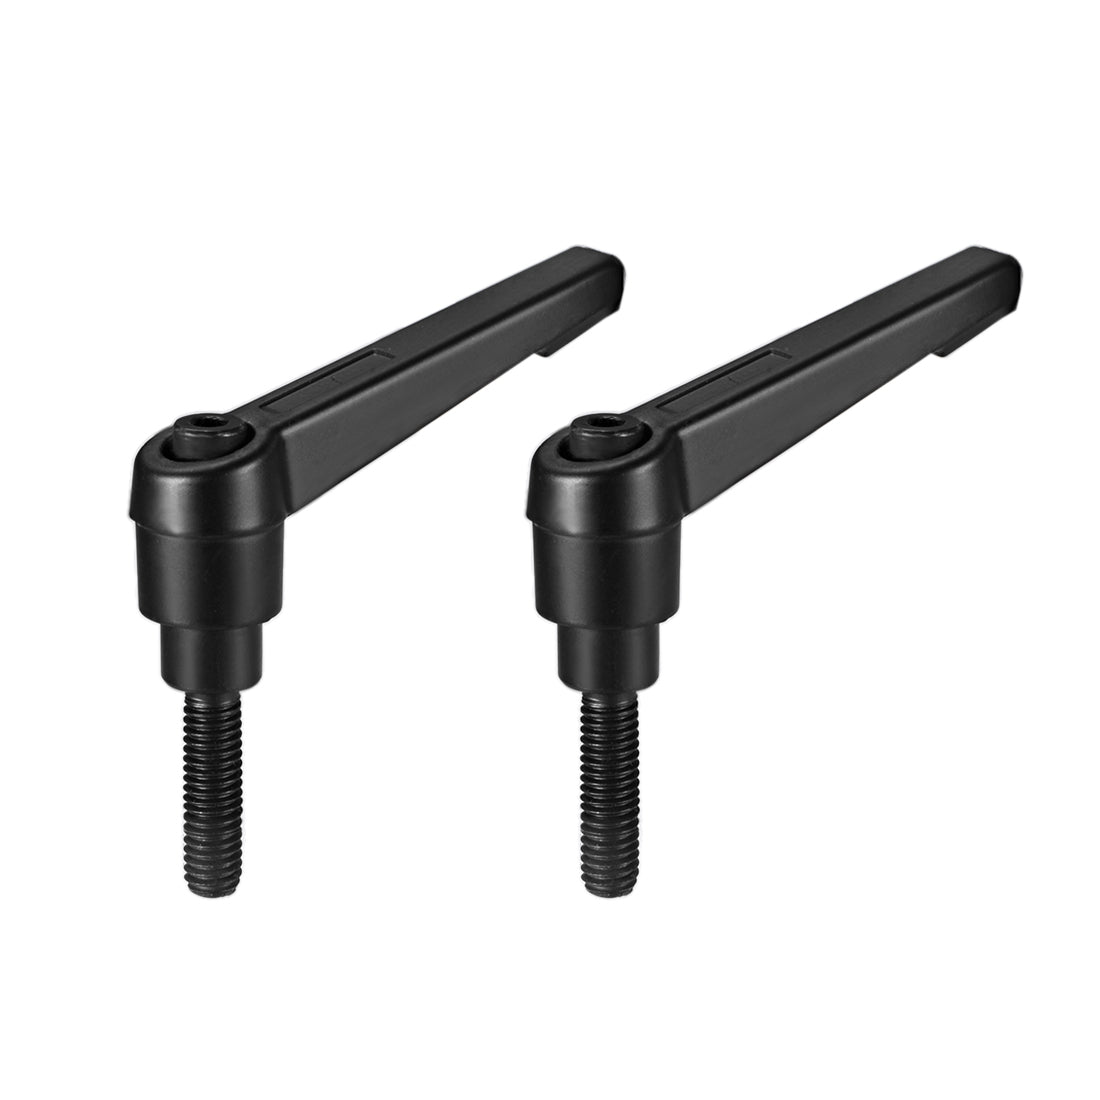 uxcell Uxcell Handles Adjustable Clamping Lever Push Button Ratchet Male Threaded Stud 2Pack